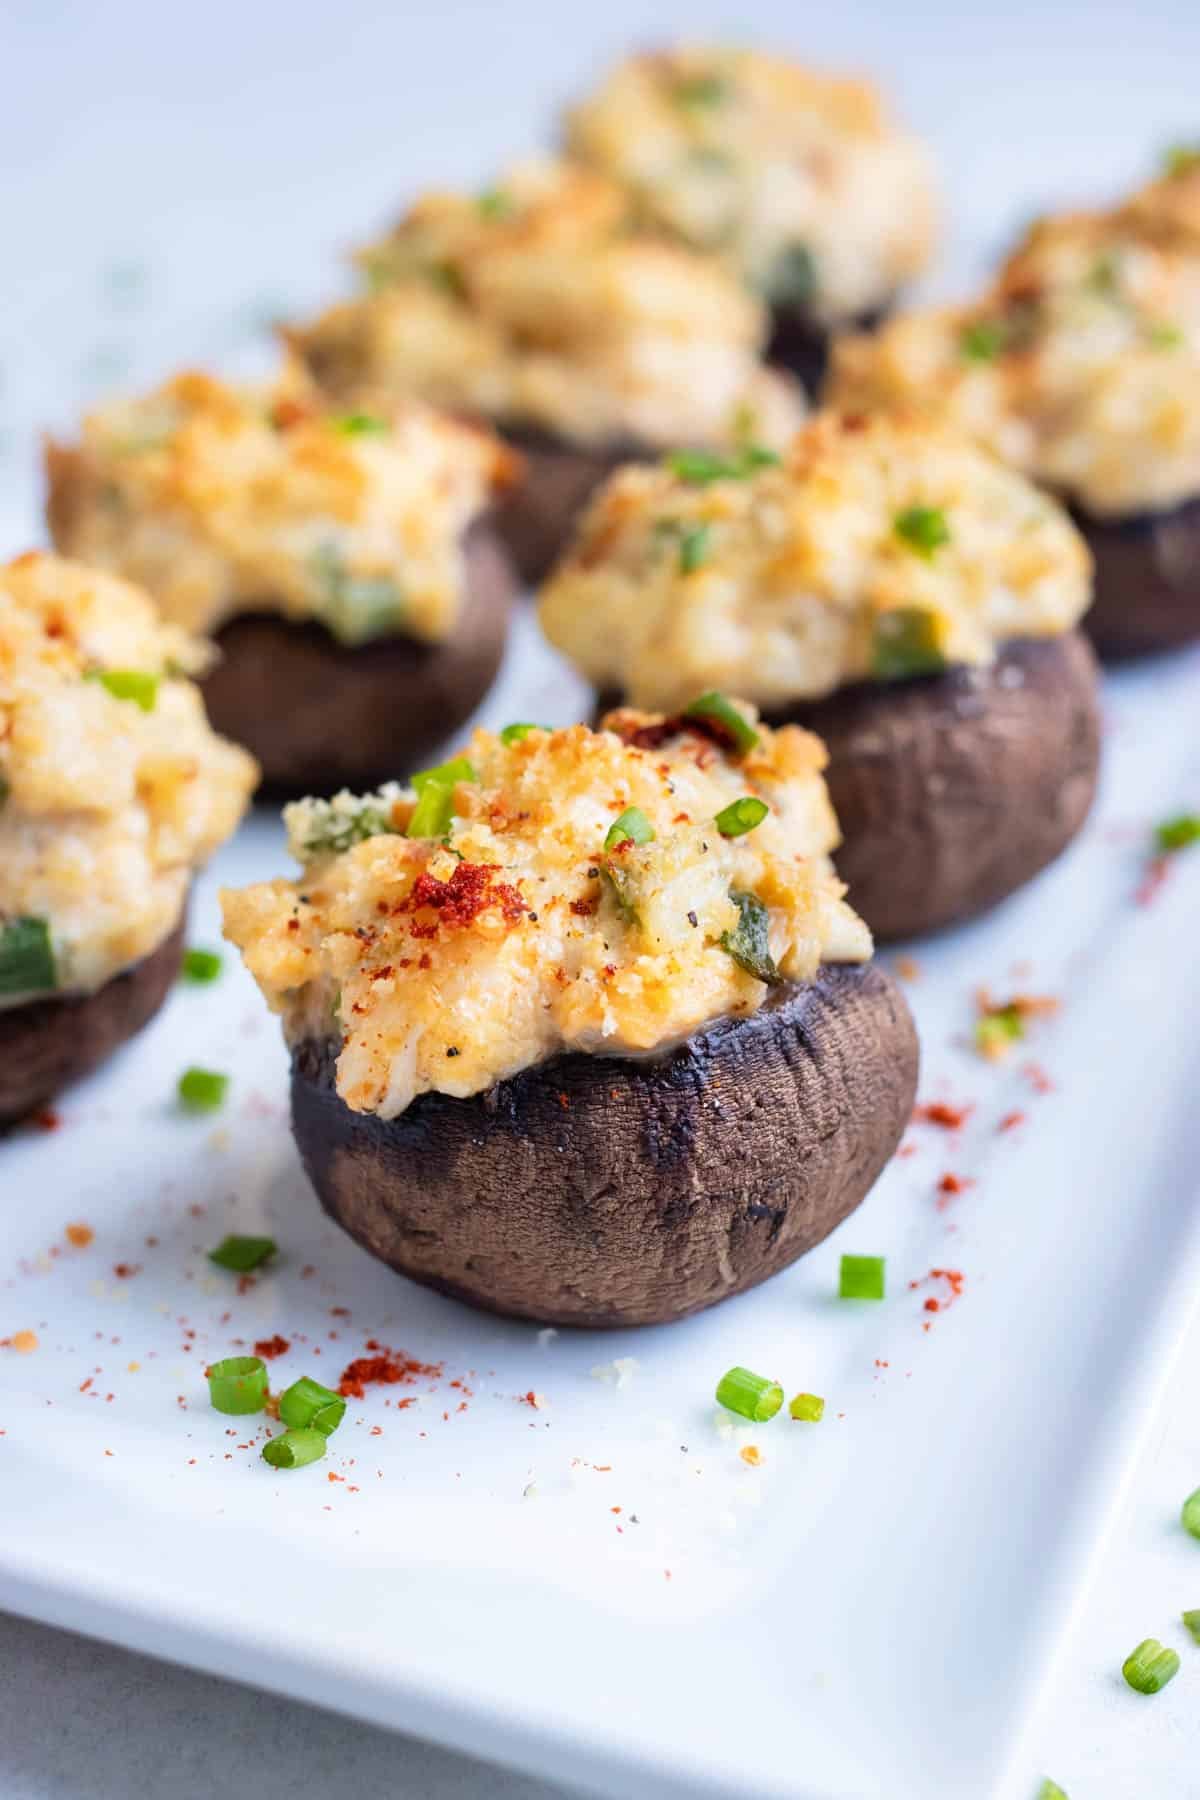 Creamy crab stuffed mushrooms are served on a white tray.